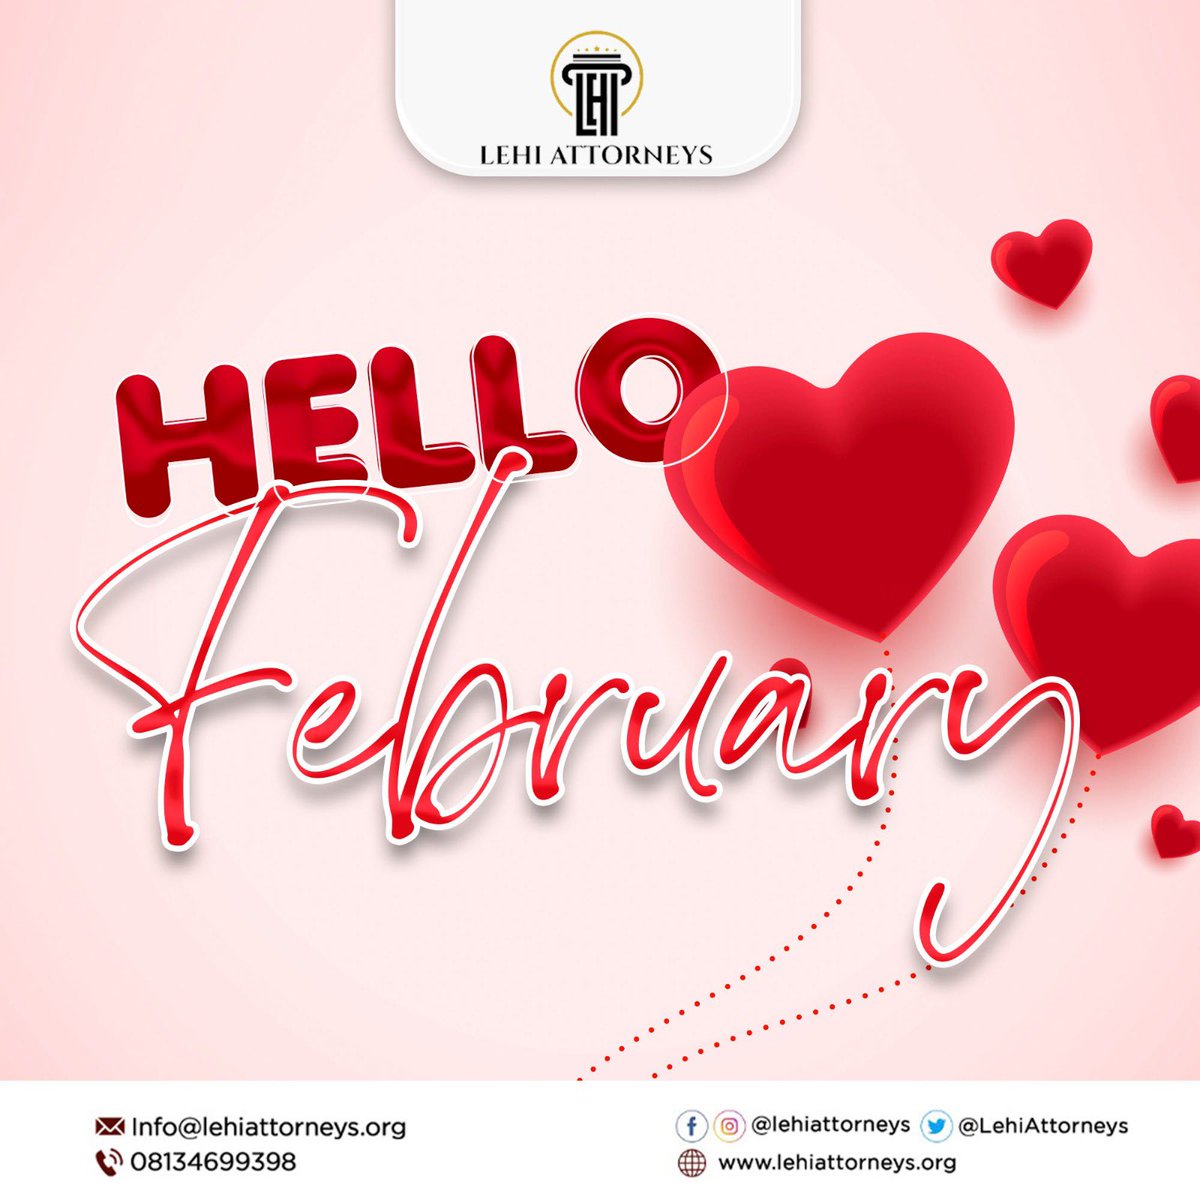 Happy New Month from all of us at Lehi Attorneys. 

#lawfirm
#nigerianlawyers
#abujalawyers